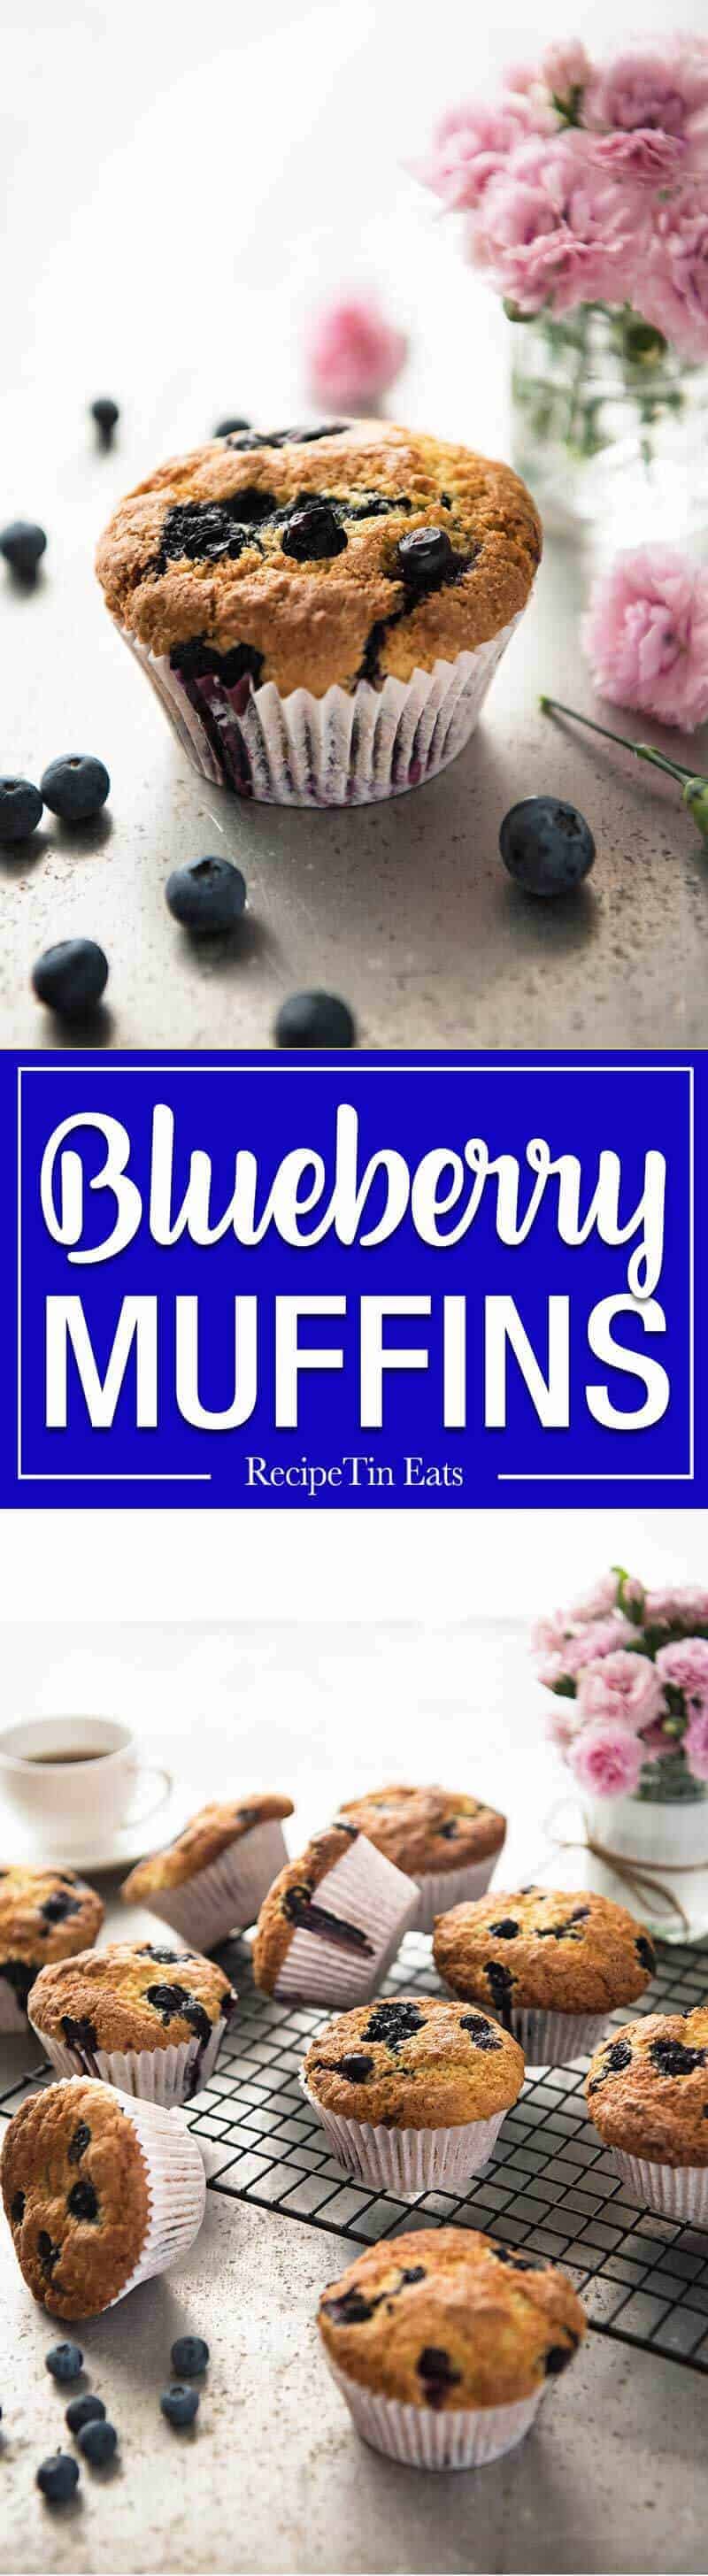 The secret for moist fluffy blueberry muffins: use butter plus oil, don't mix the batter more than 10 times and don't bake for longer than 20 minutes. Perfect muffins, every time! recipetineats.com